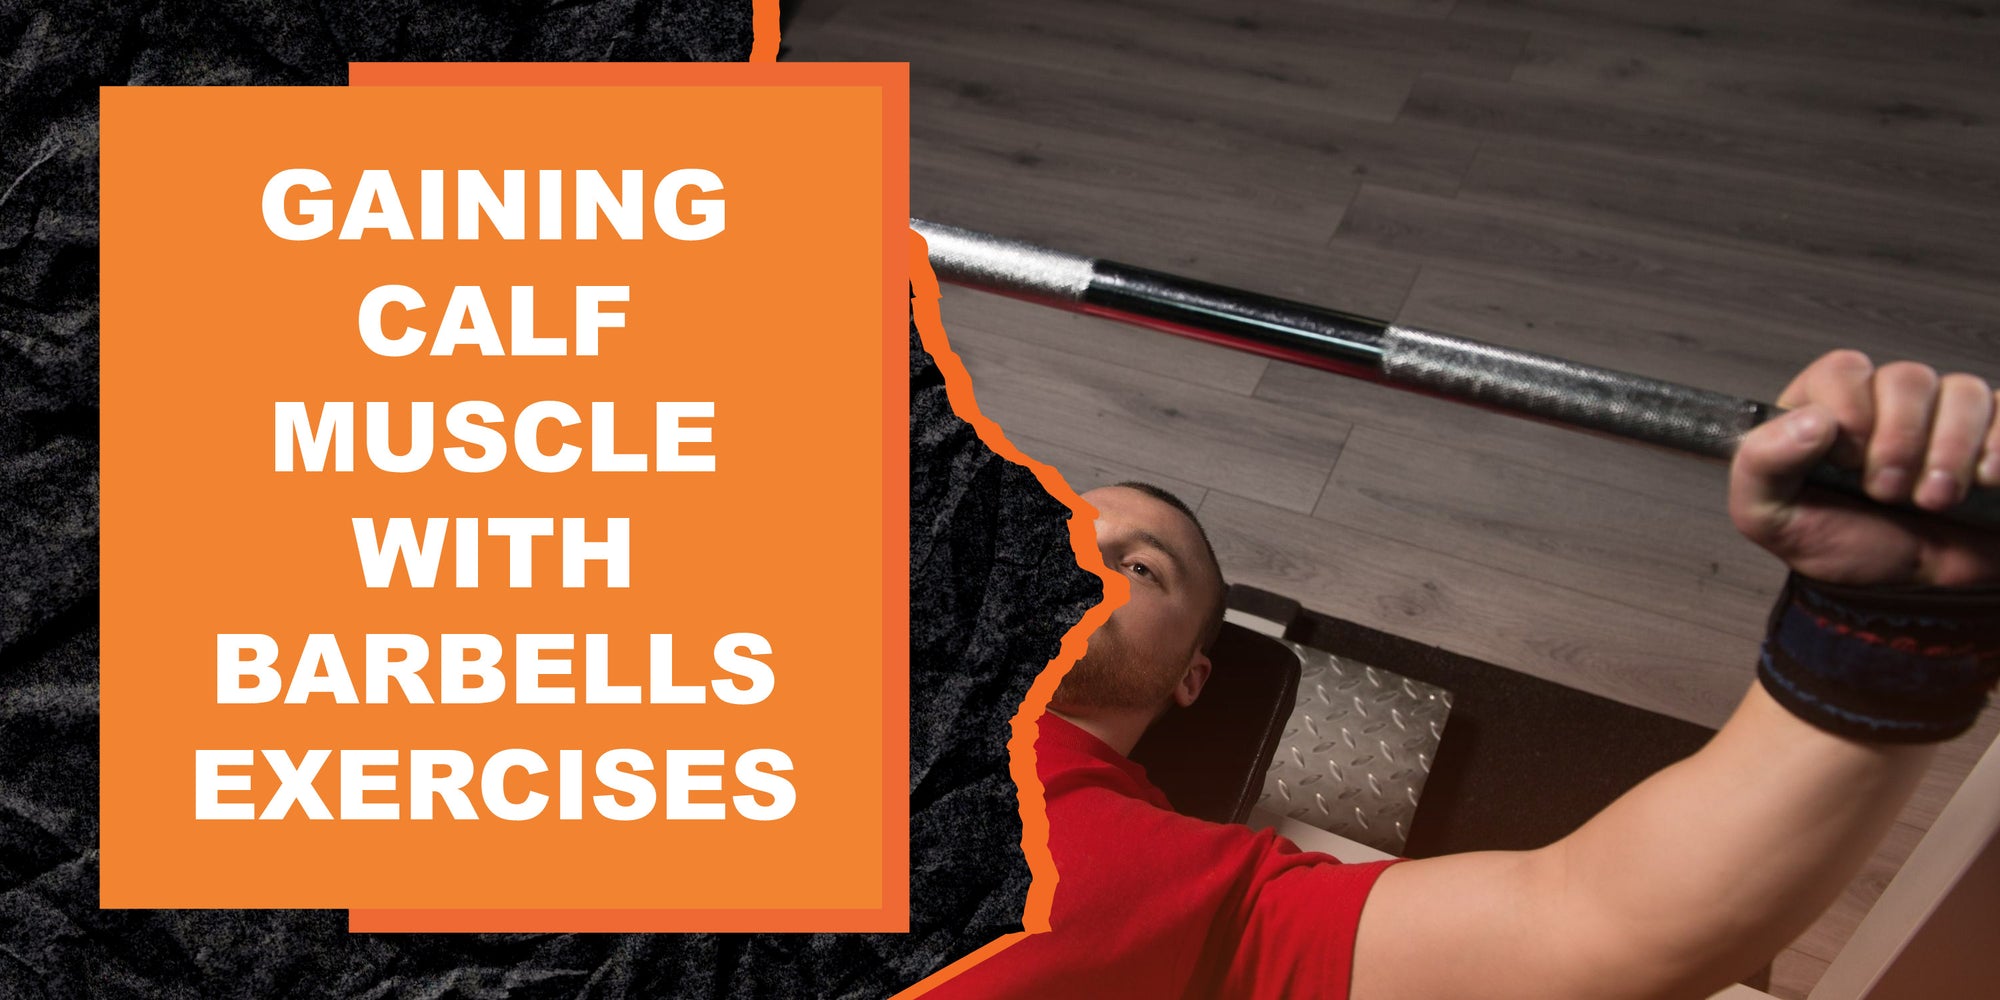 Gaining Calf Muscle with Barbells Exercises